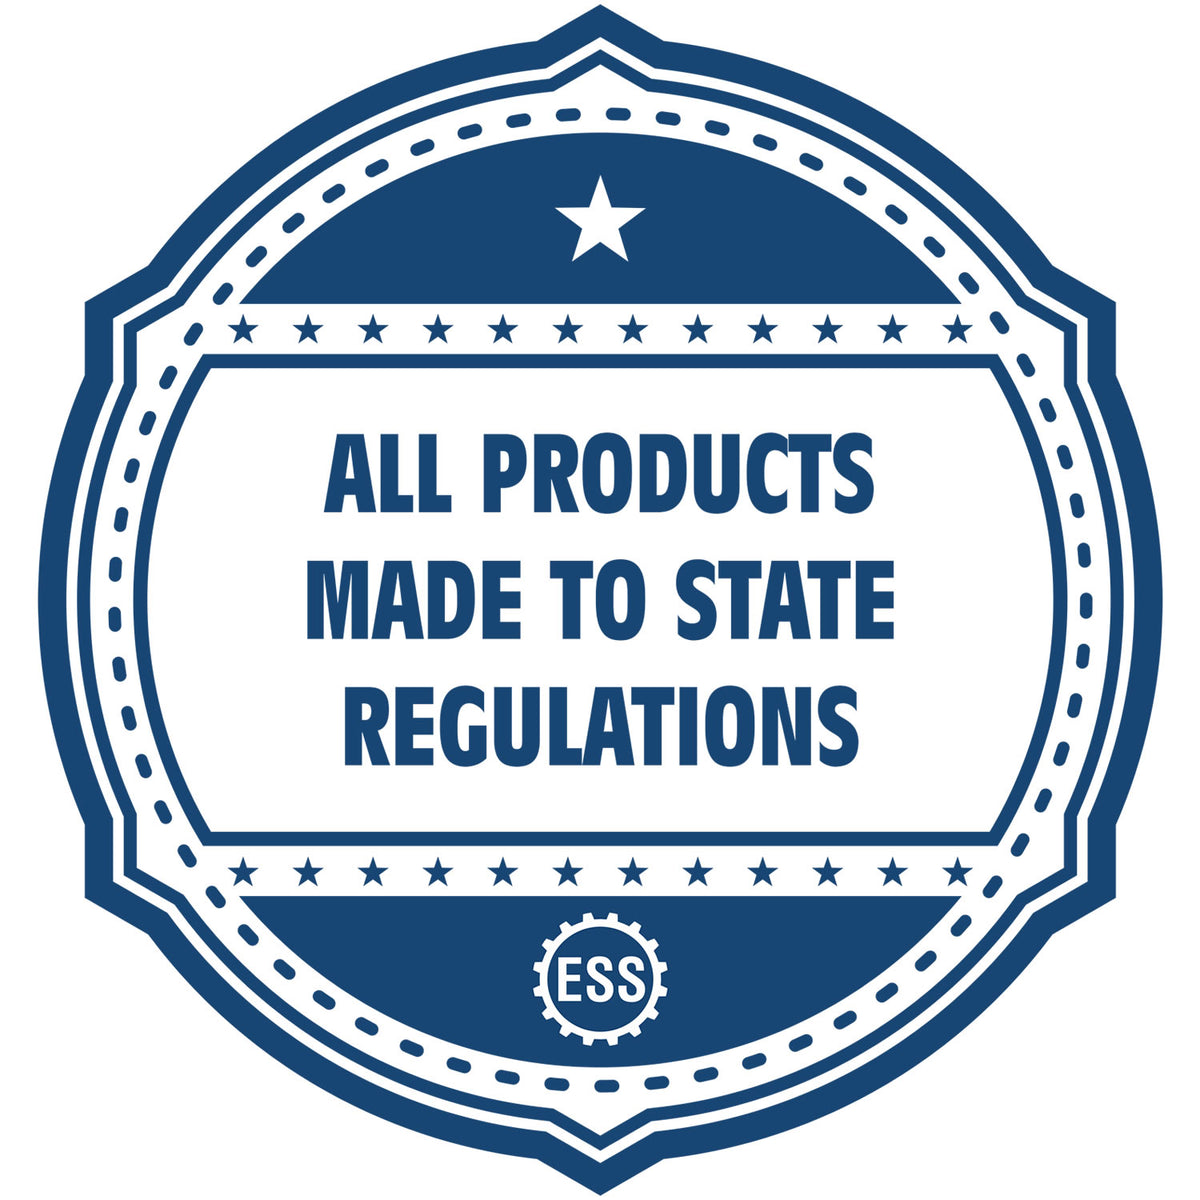 A blue icon or badge for the Gift Ohio Land Surveyor Seal showing that this product is made in compliance with state regulations.